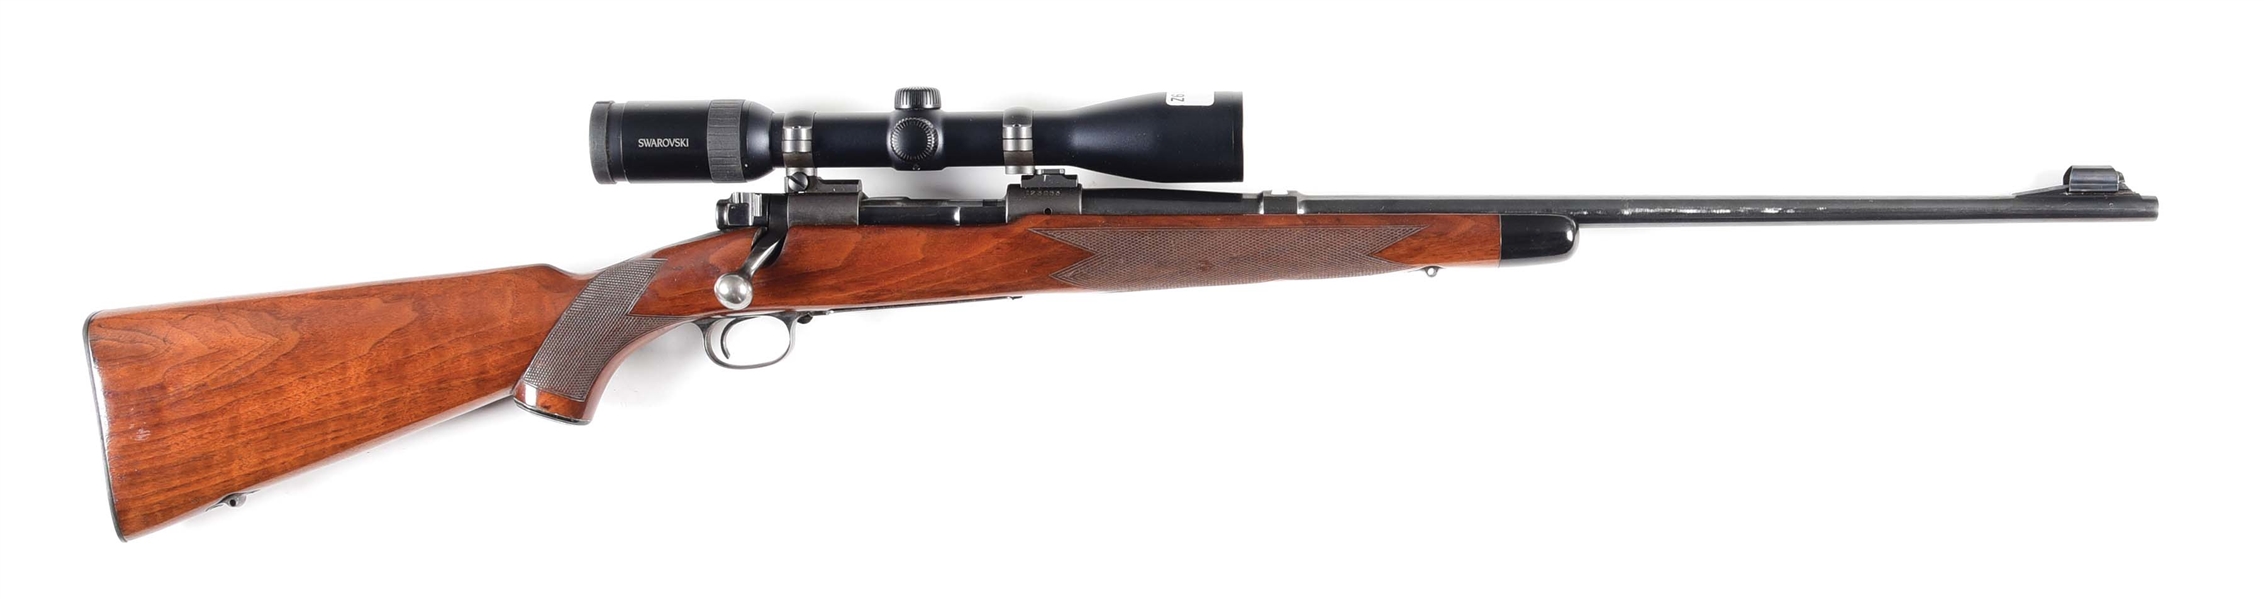 (M) WINCHESTER MODEL 70 SUPER GRADE BOLT ACTION RIFLE WITH SCOPE.